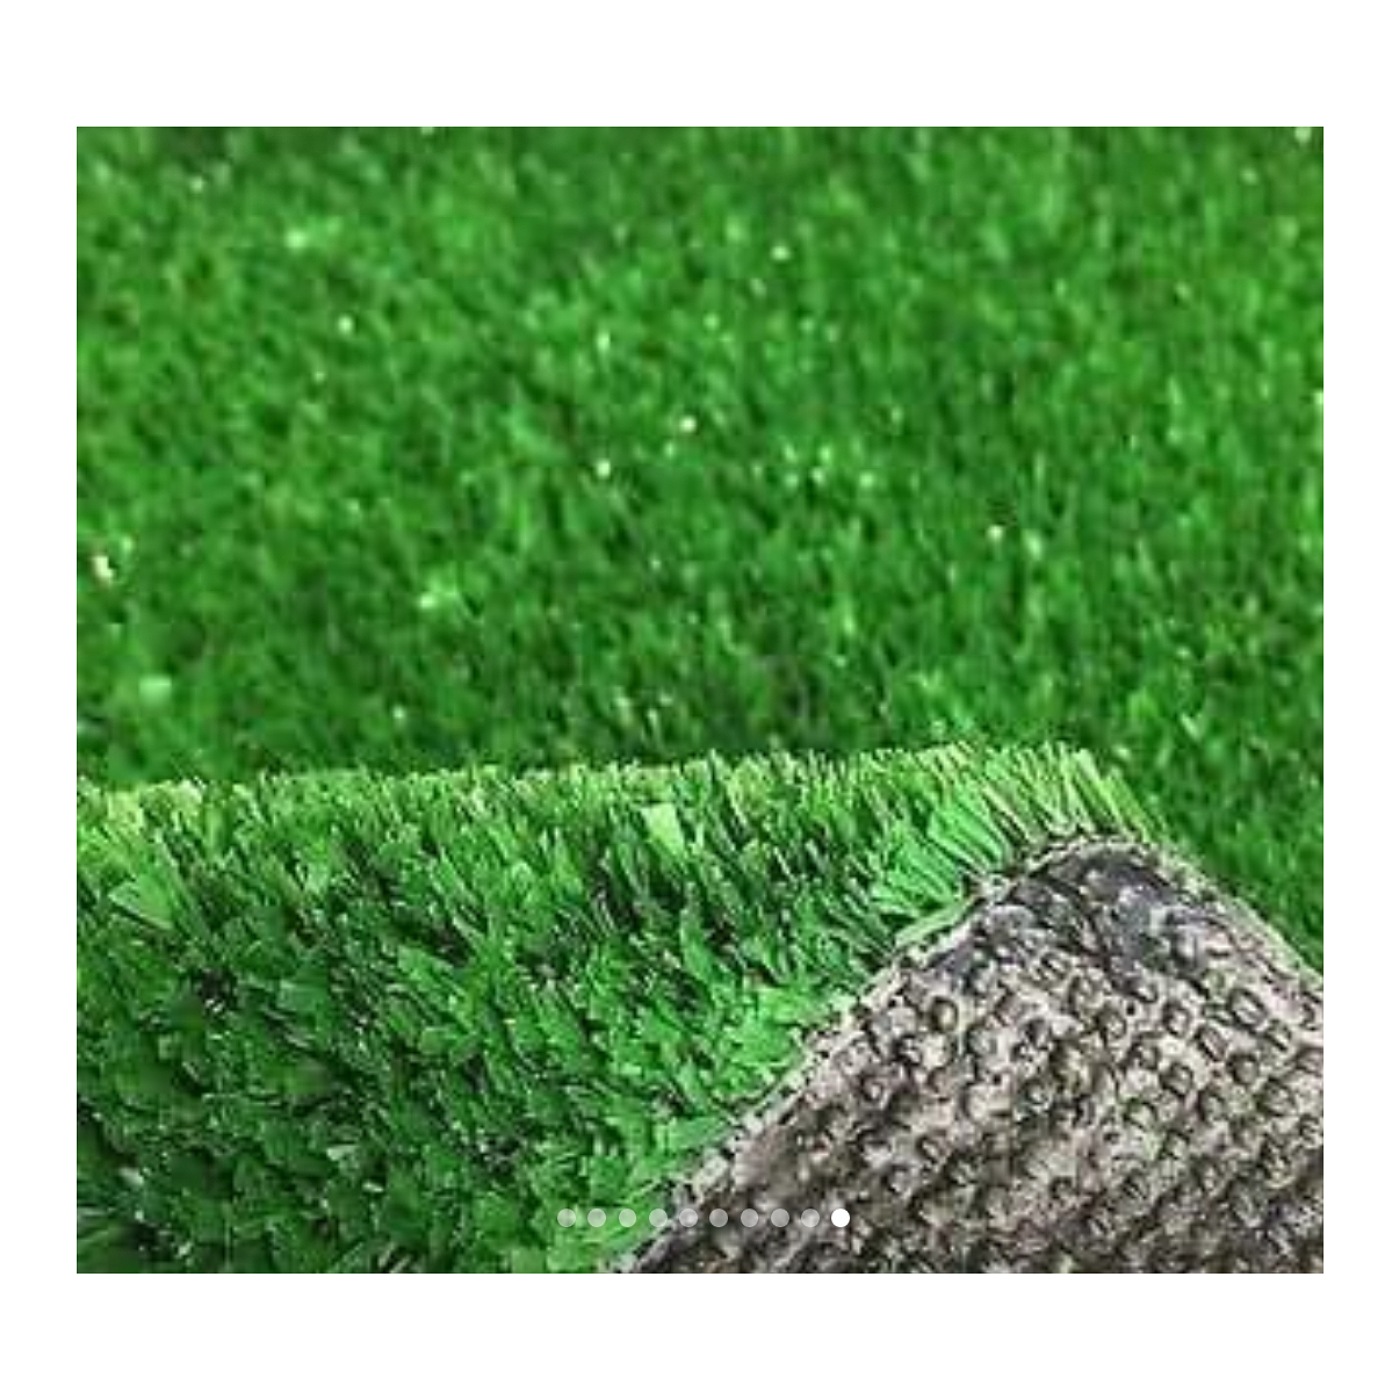 Green Artificial Grass With Black Underside.